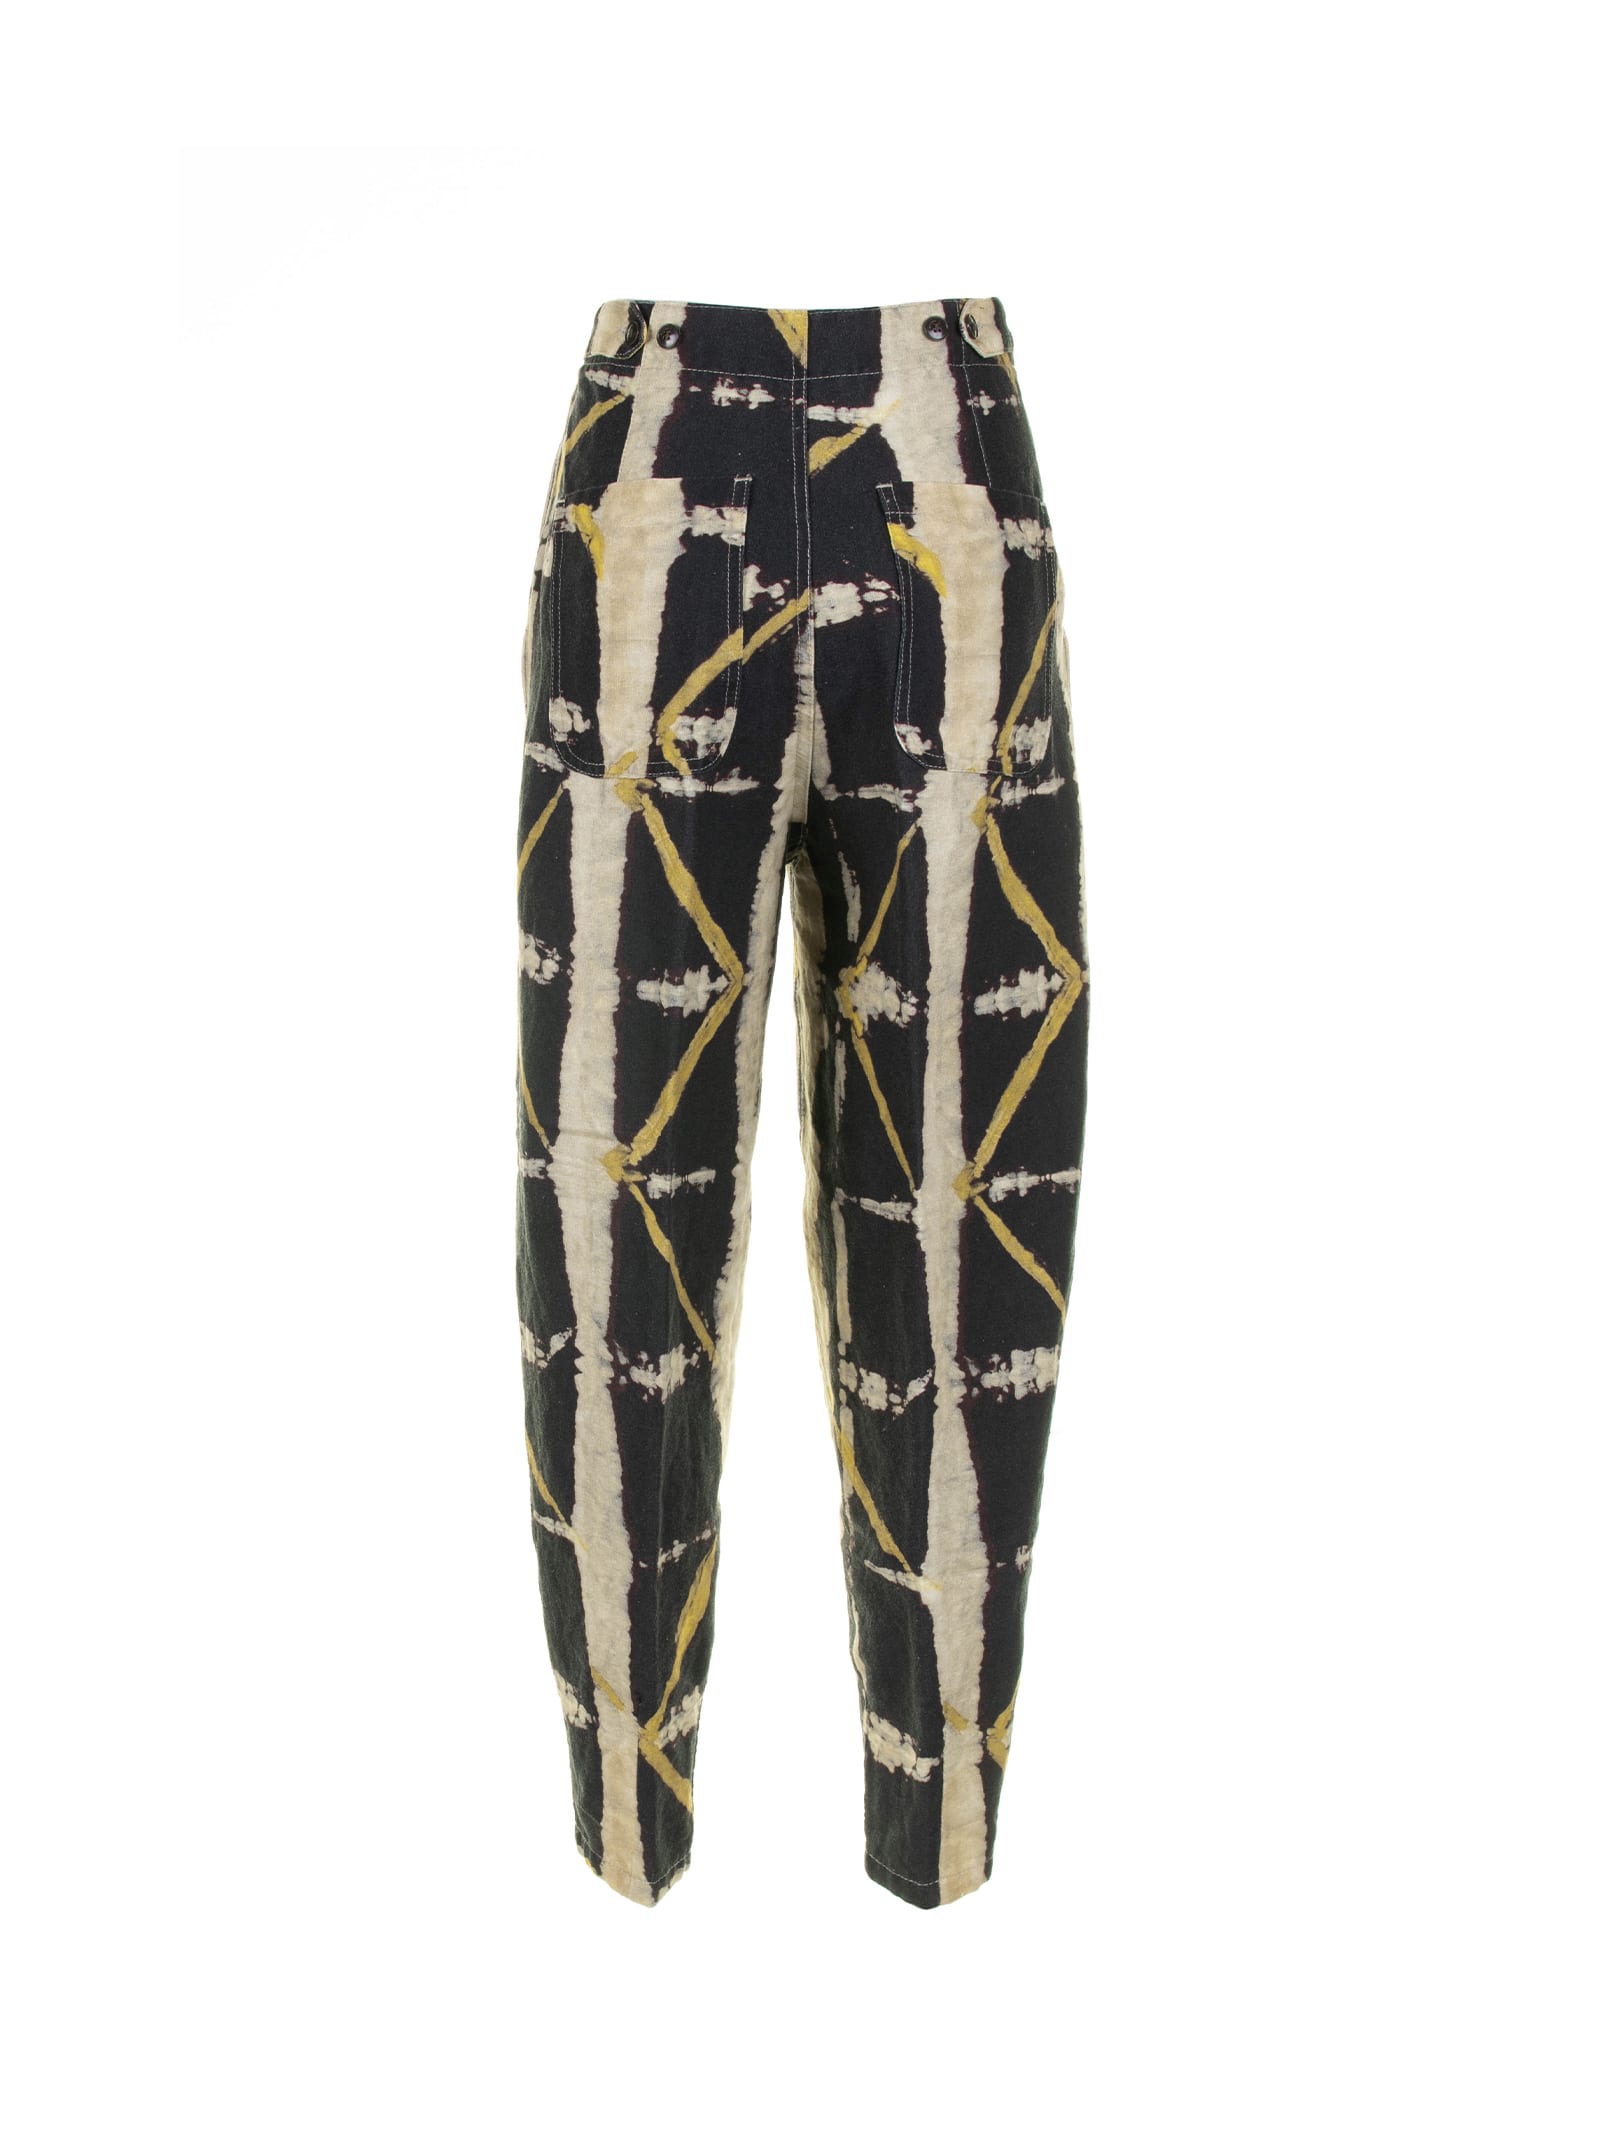 Shop Myths High-waisted Patterned Trousers